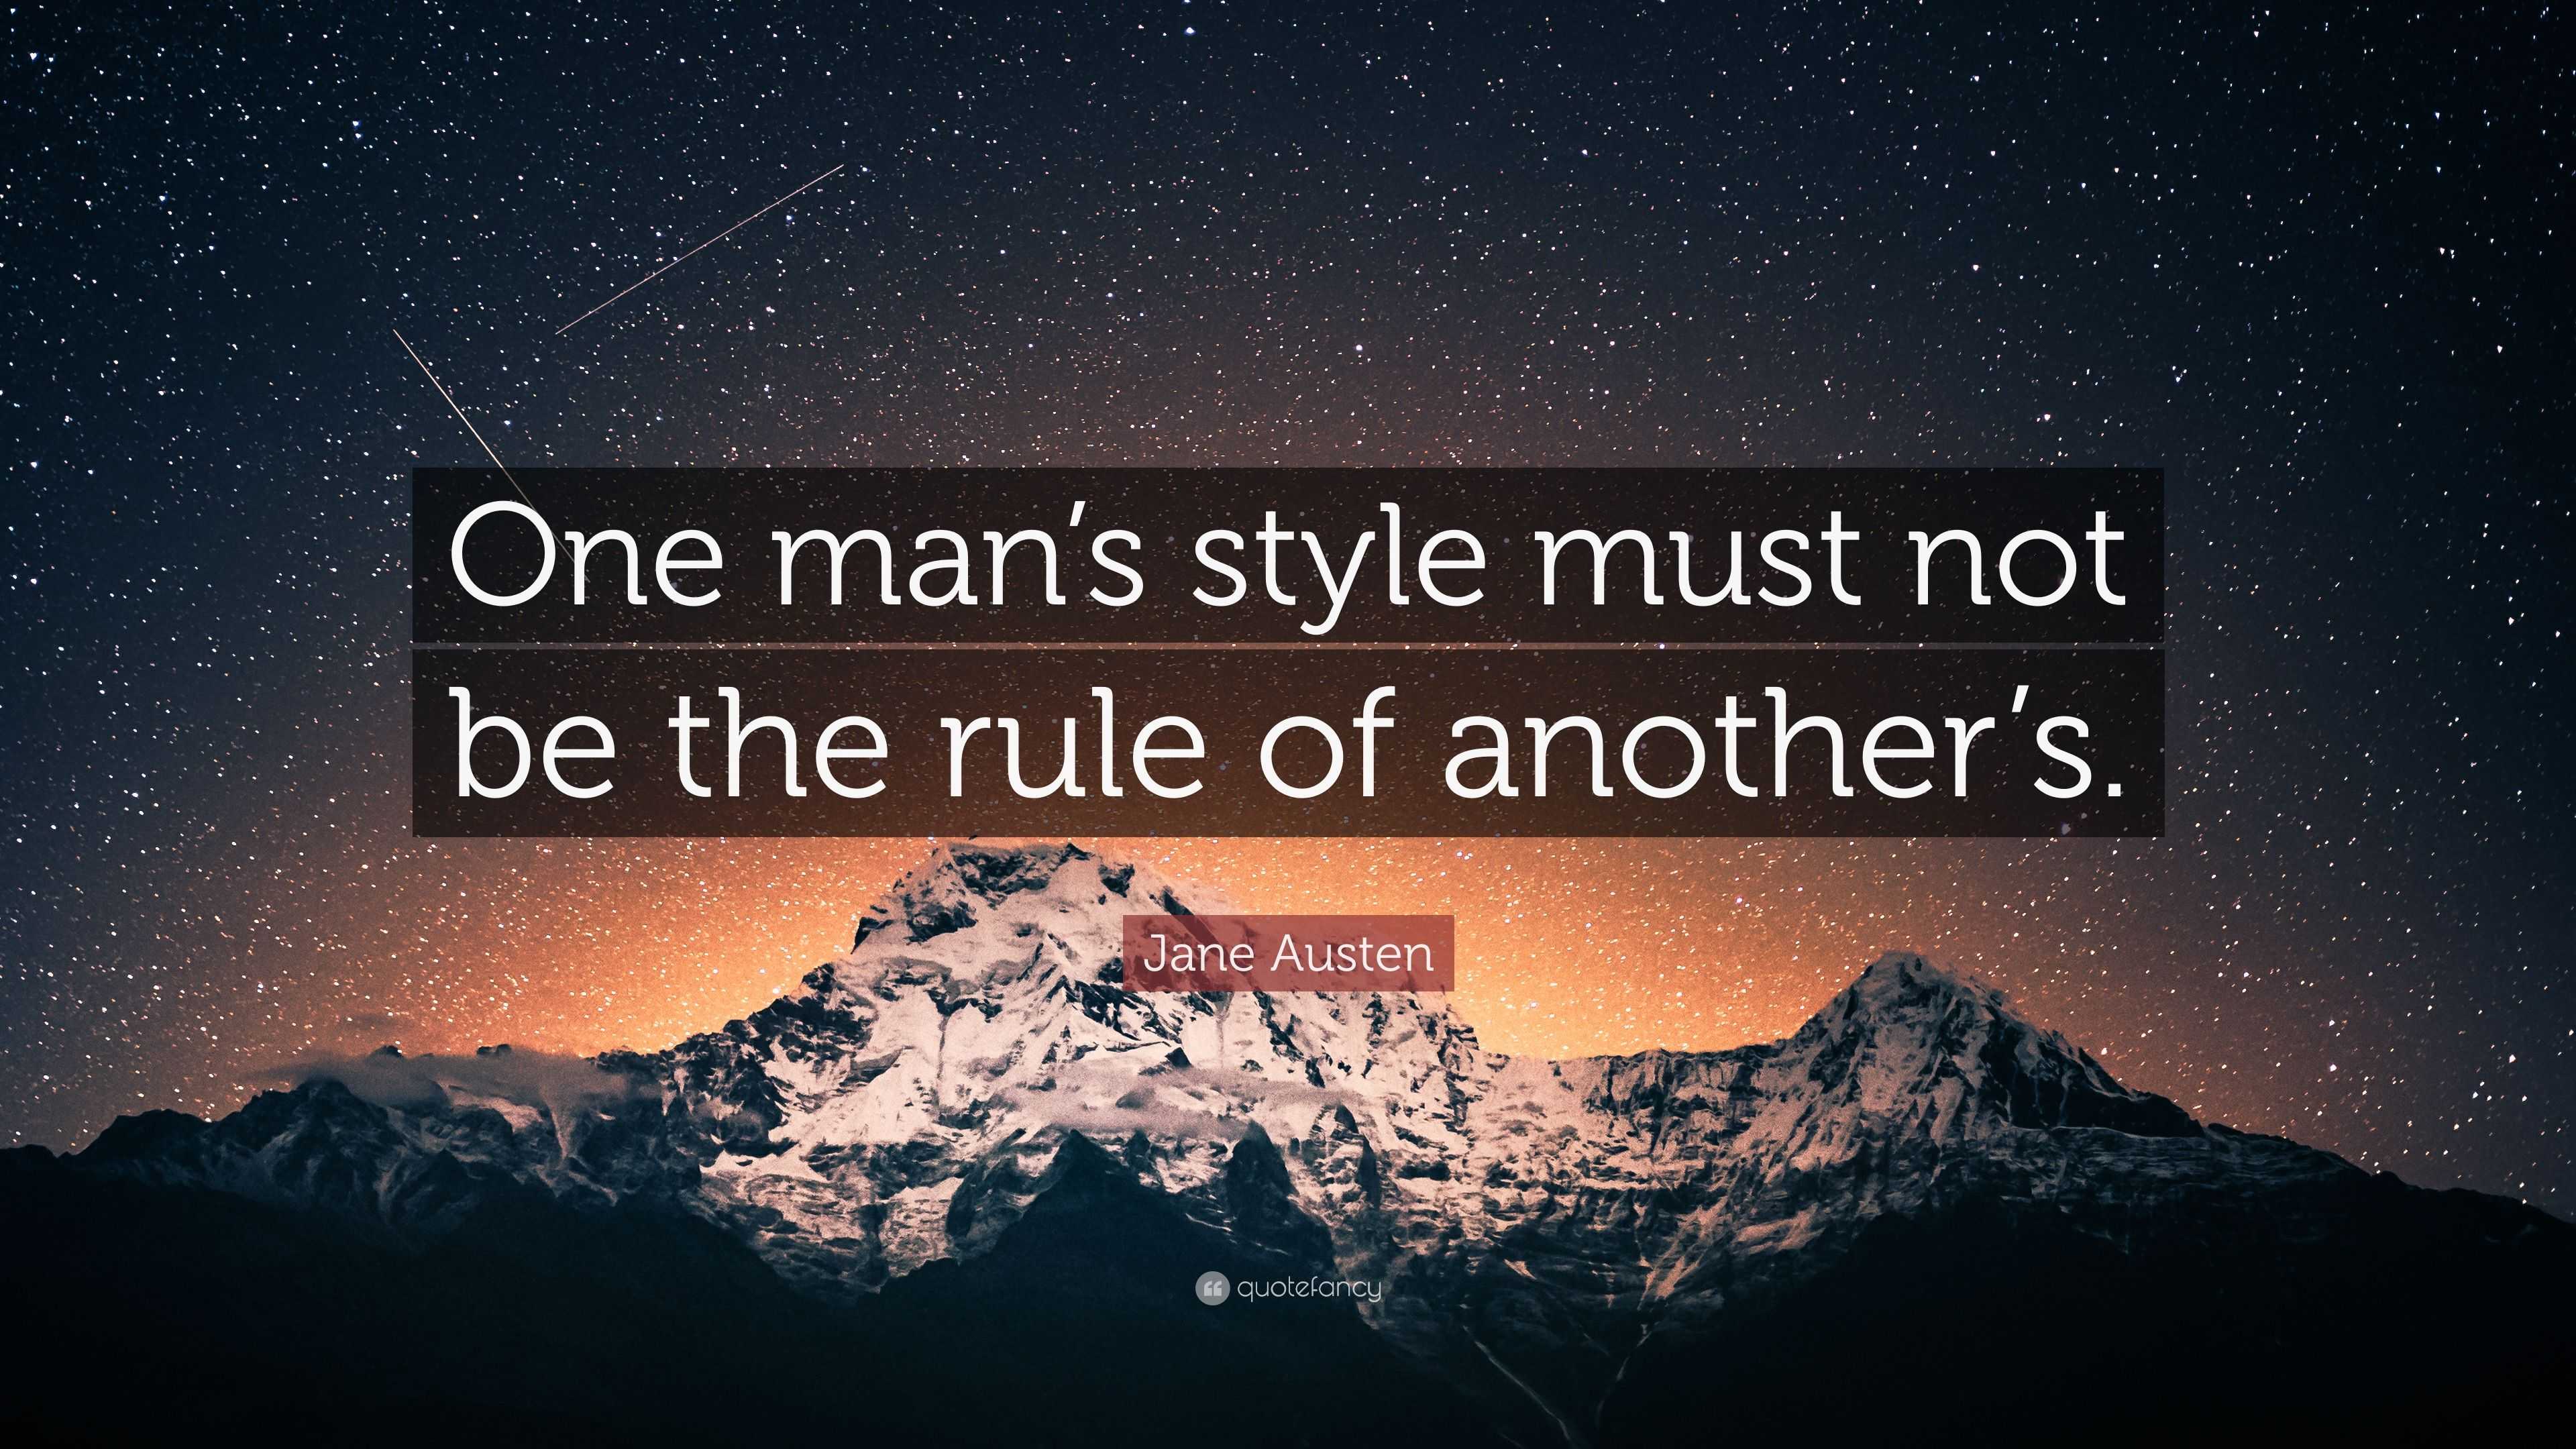 Jane Austen Quote: “One man's style must not be the rule of another's.”